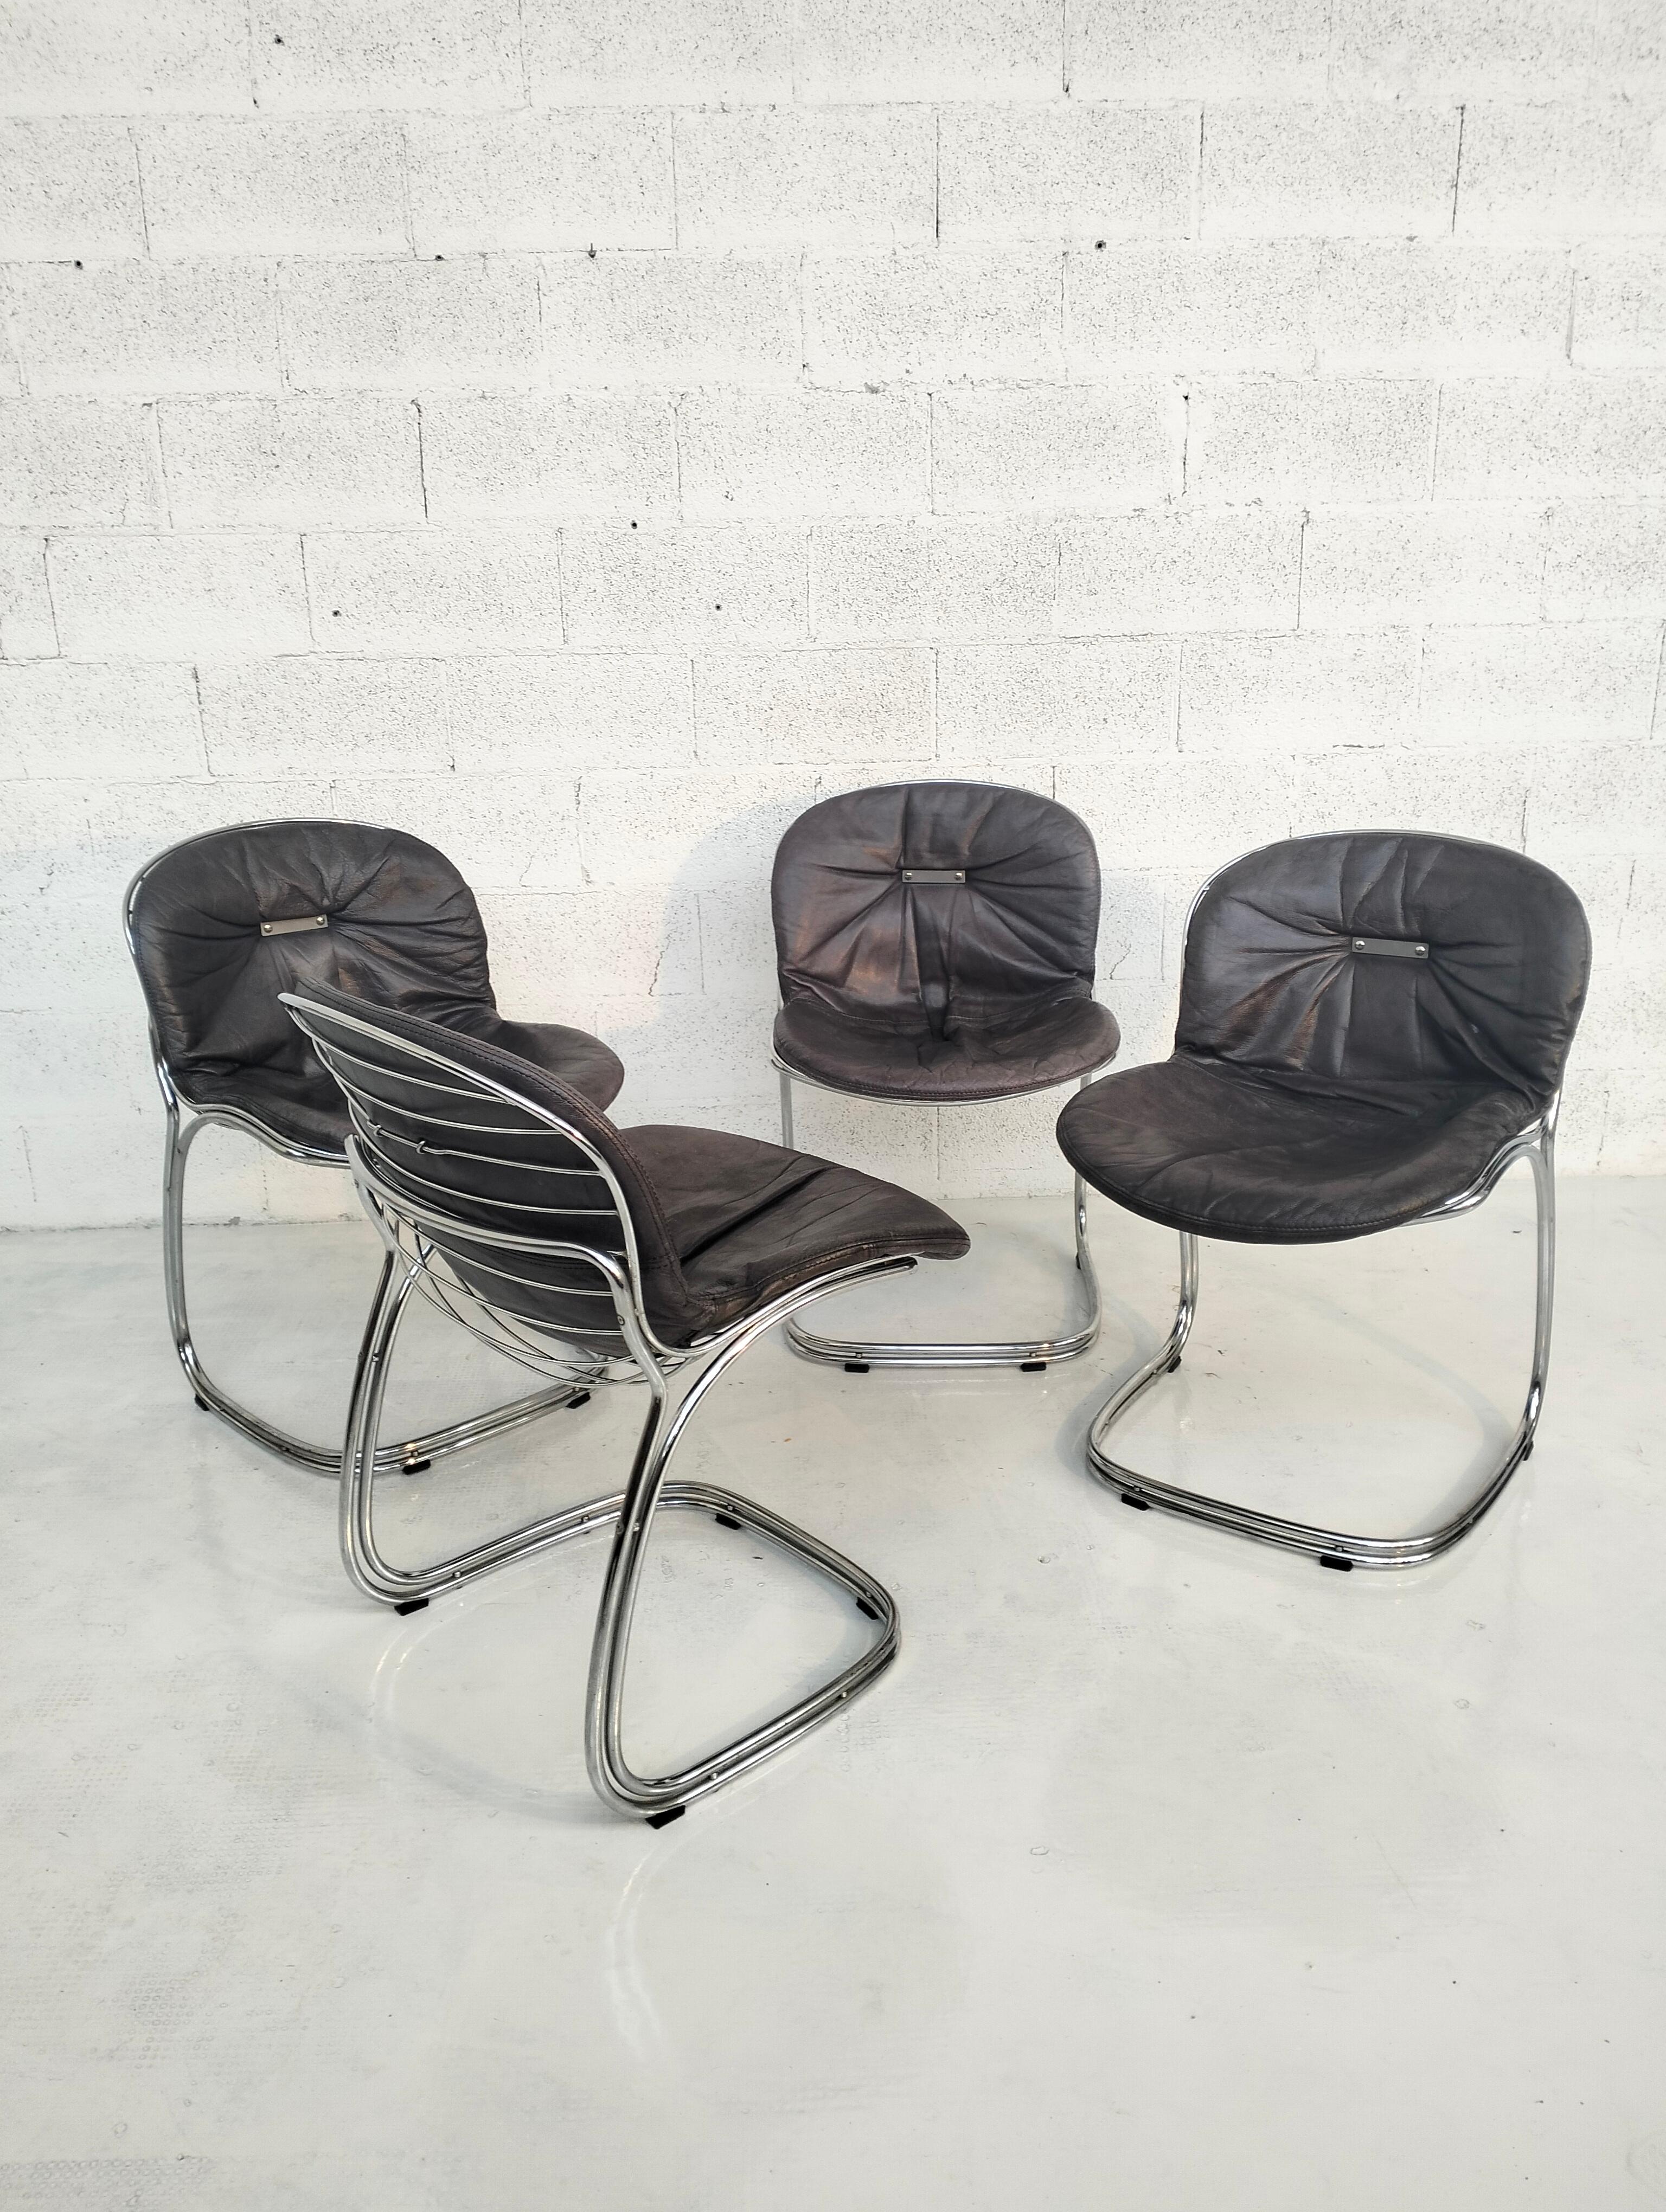 Sabrina chair designed by Gastone Rinaldi for Rima in the 70s. Characterized by the chromed steel tubular structure and the cushions covered in brown imitation leather.

Gastone Rinaldi was born in Padua in 1920. He initially worked for the Rima